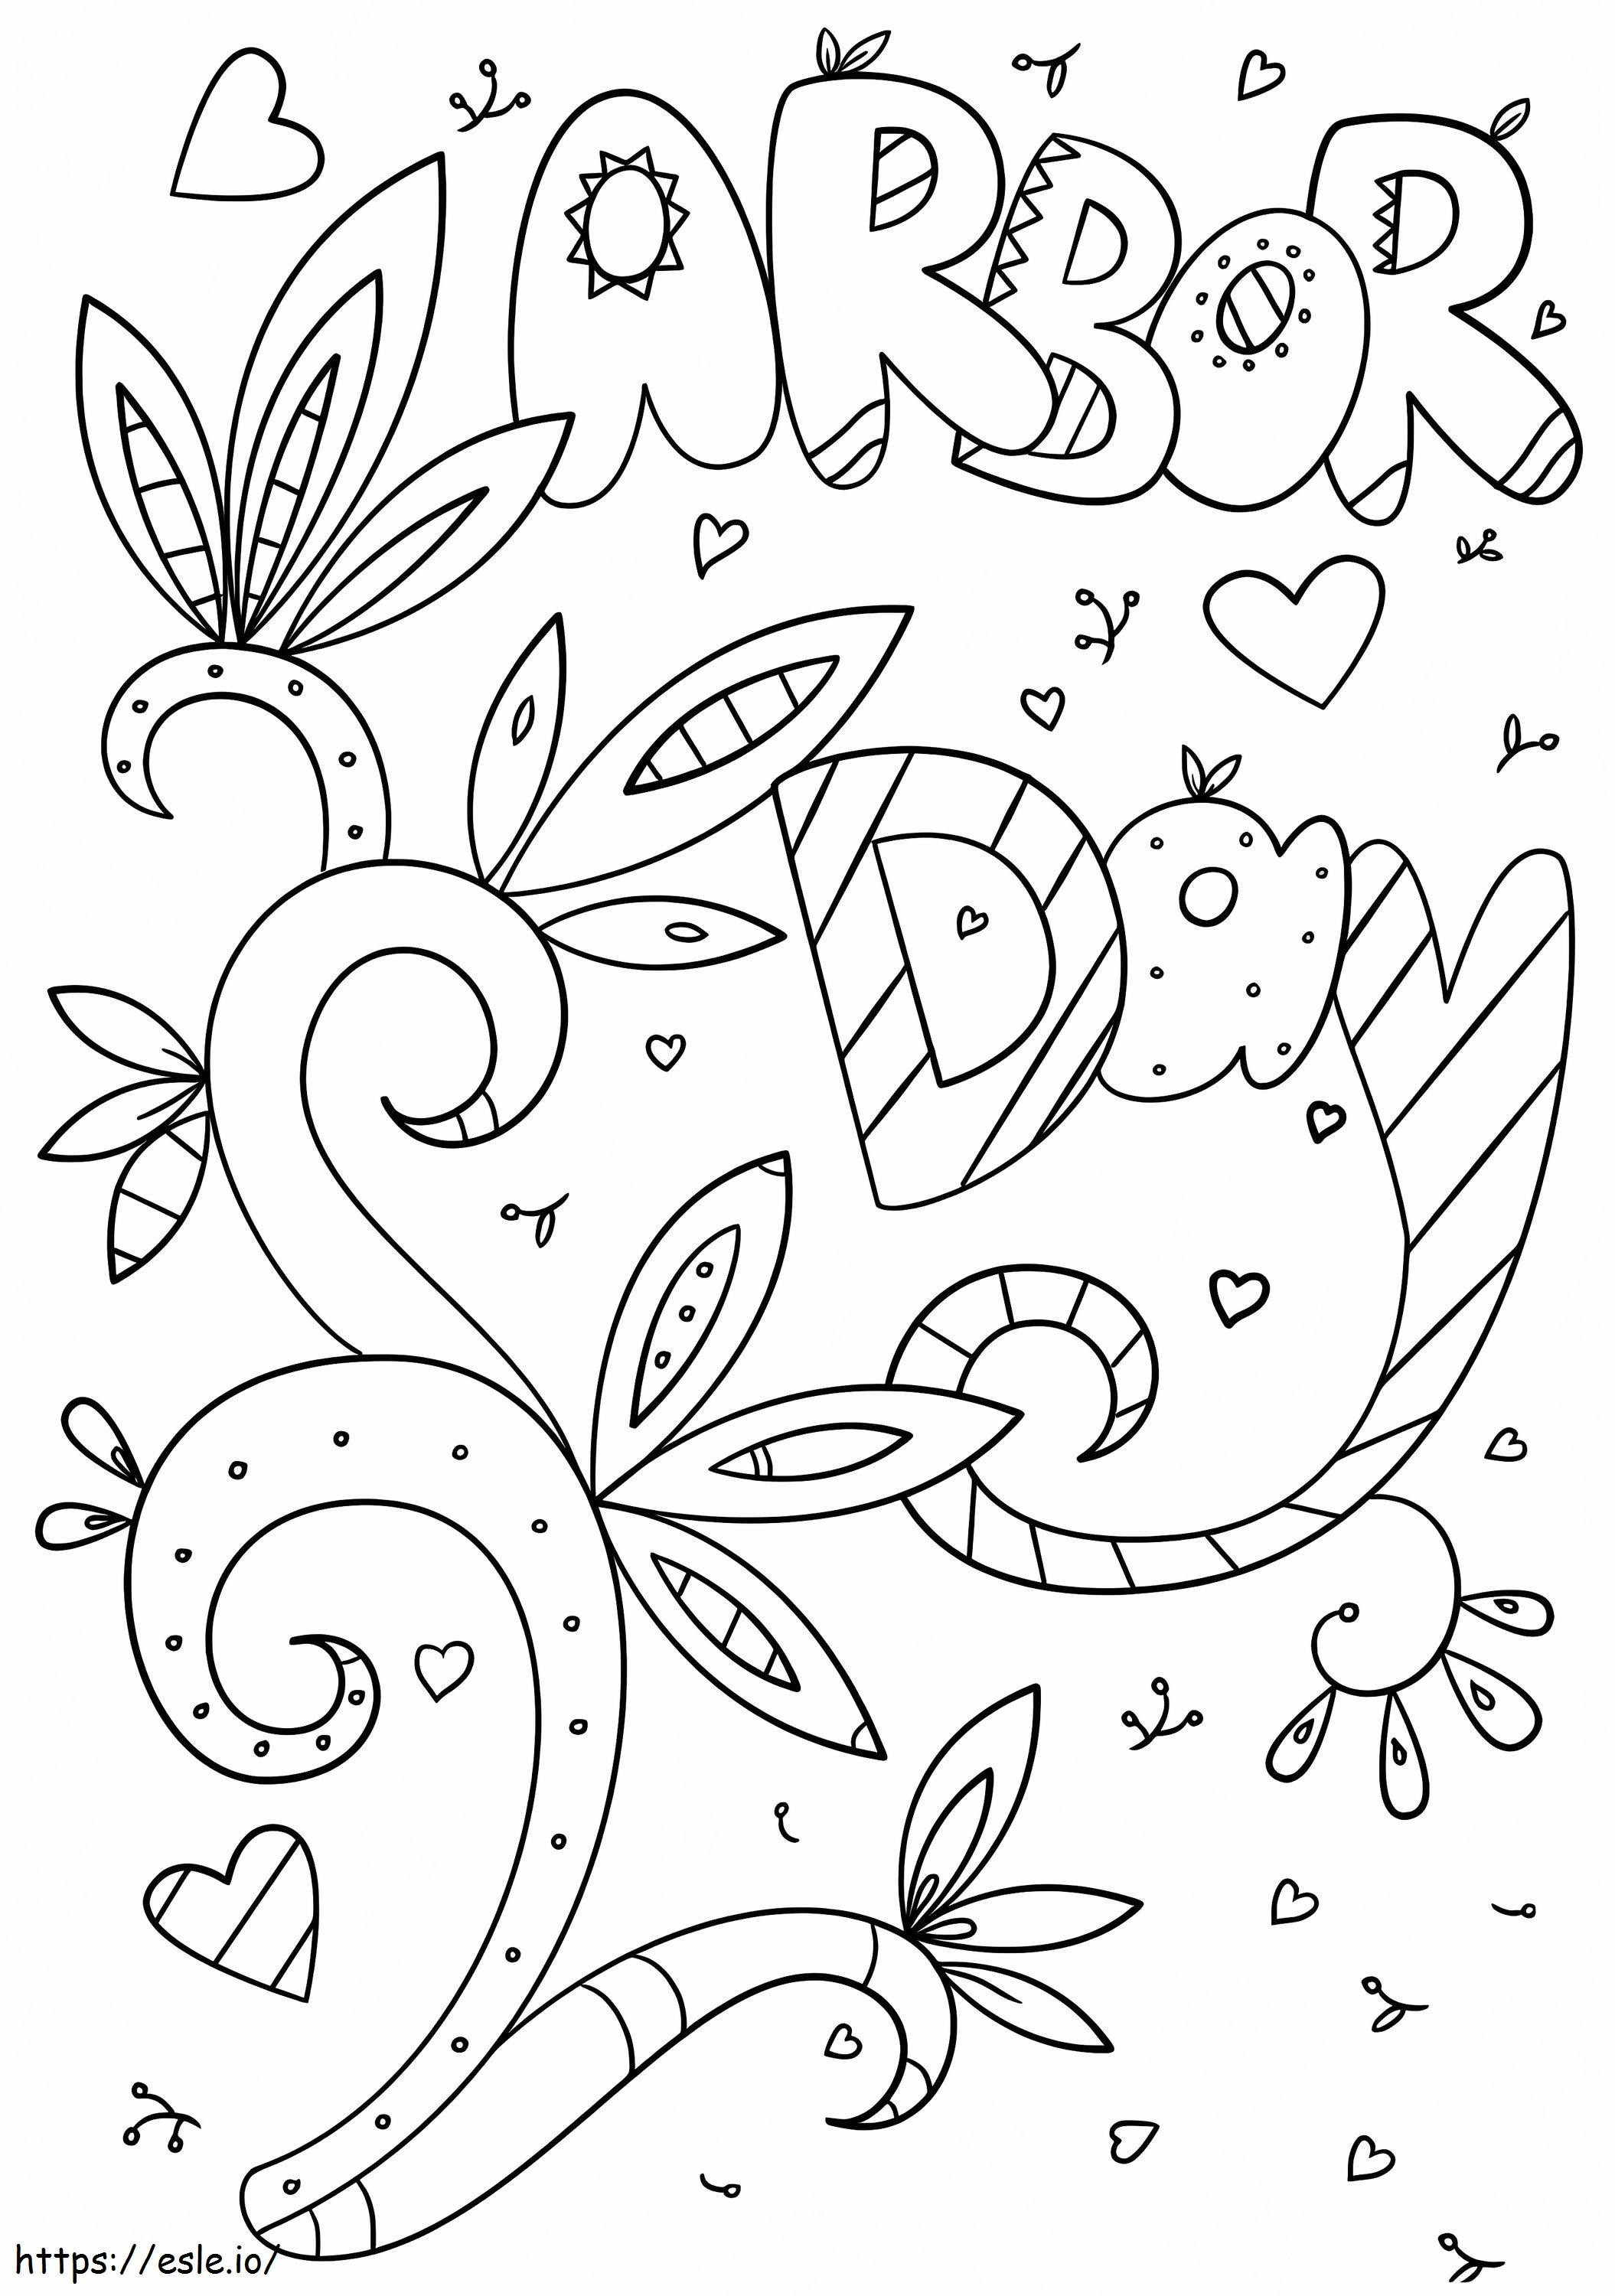 Arbor Day 1 coloring page